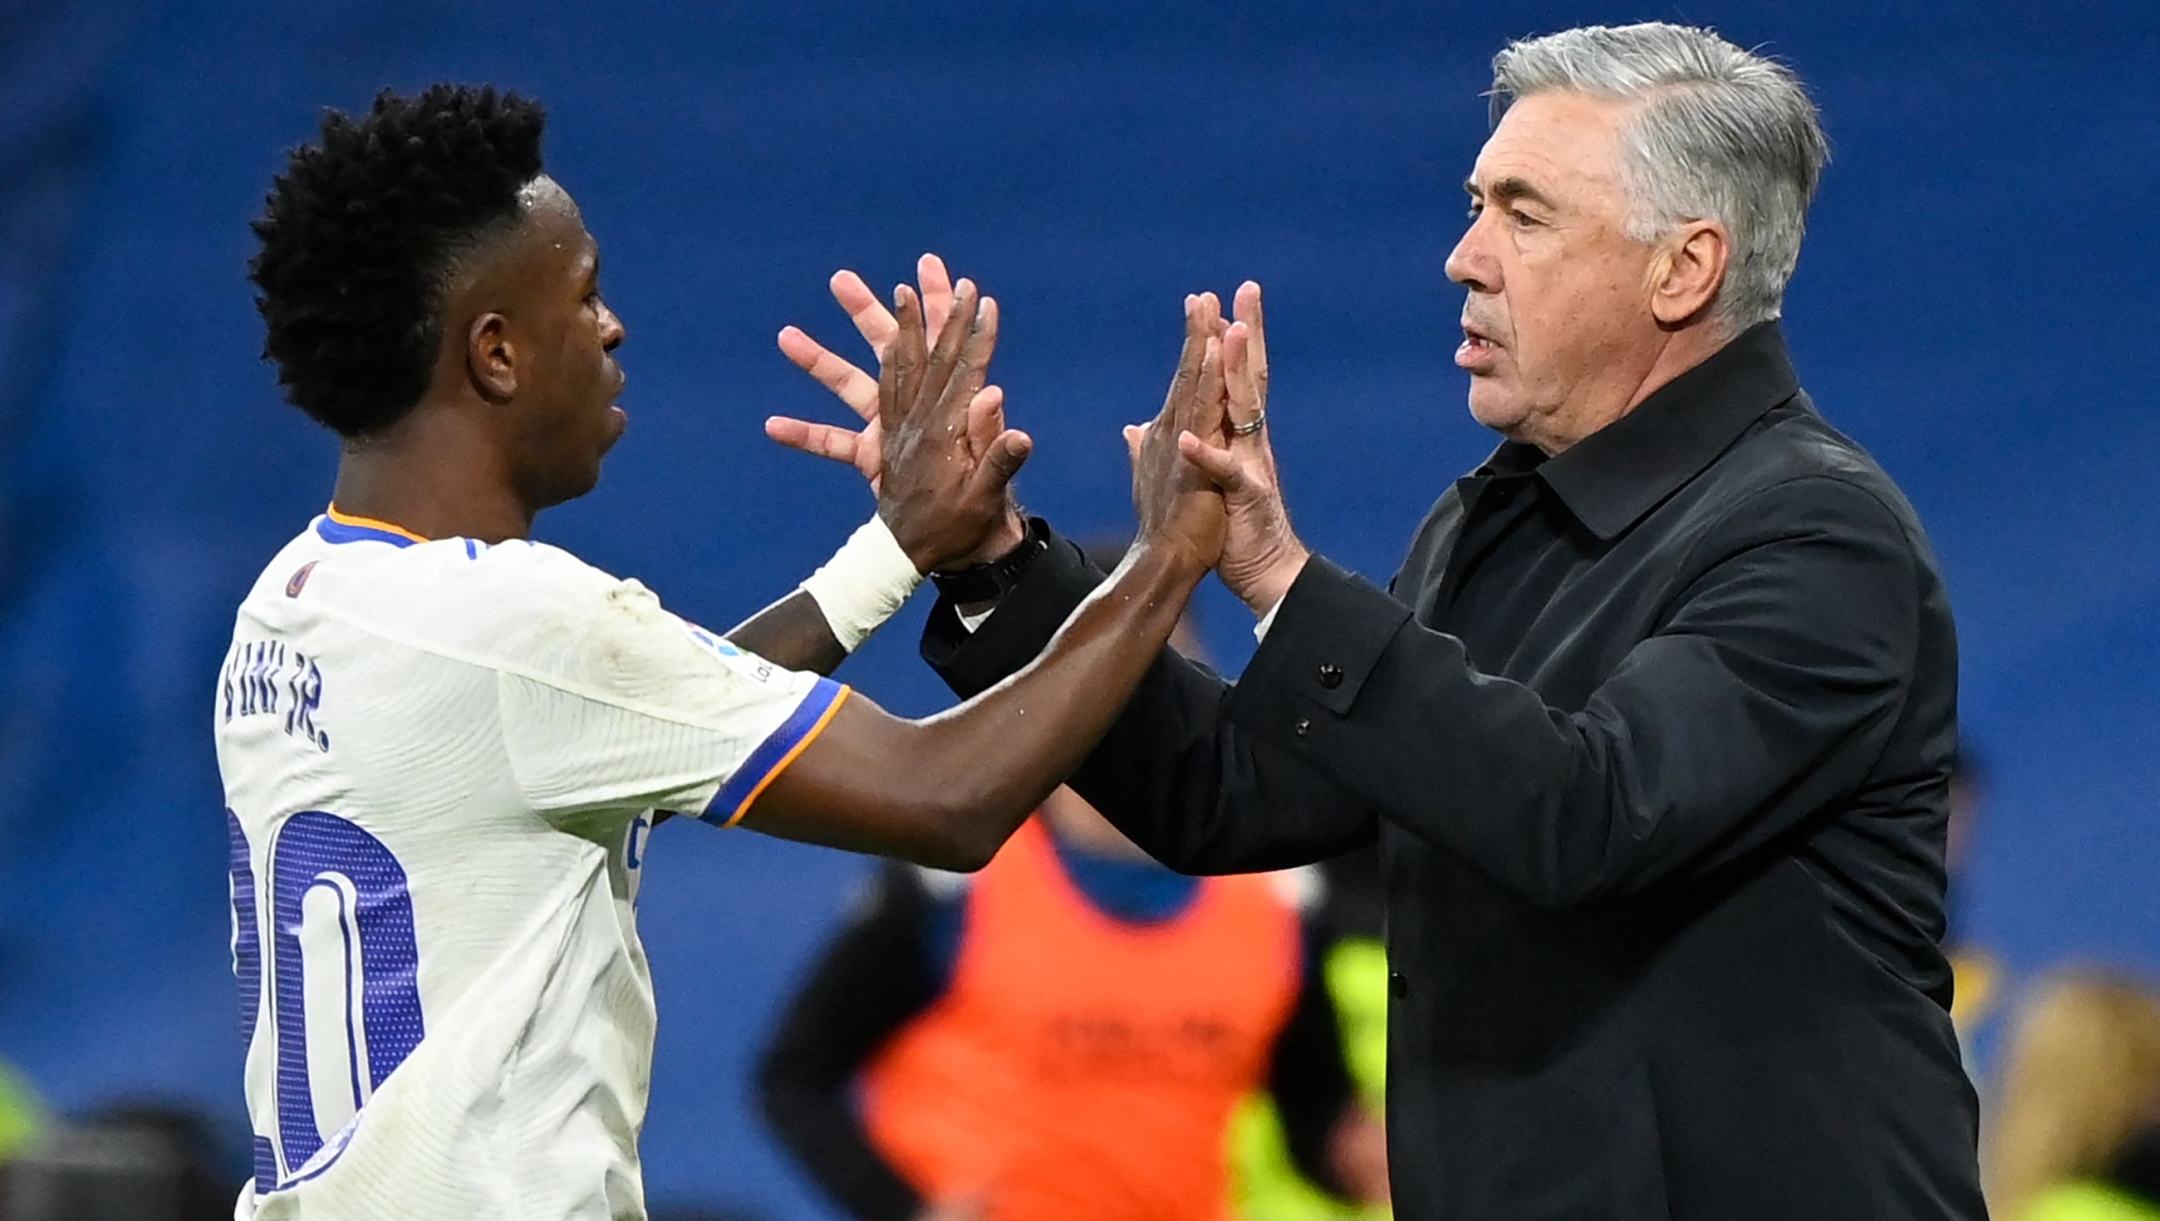 (FILES) Real Madrid's Brazilian forward Vinicius Junior (L) celebrates with Real Madrid's Italian coach Carlo Ancelotti after scoring a goal during the Spanish league football match between Real Madrid CF and Deportivo Alaves at the Santiago Bernabeu stadium in Madrid on February 19, 2022. Italian Carlo Ancelotti will be the coach of Brazil from the Copa America 2024, which will be played in June-July in the United States, once his contract with Real Madrid ends, a source from the Brazilian Football Confederation (CBF) told AFP on July 4, 2023. The entity confirmed minutes that Brazilian Fernando Diniz, from Fluminense of Rio de Janeiro, will lead the five-time champions for a year, until 'Carletto' takes over as coach. (Photo by OSCAR DEL POZO / AFP)